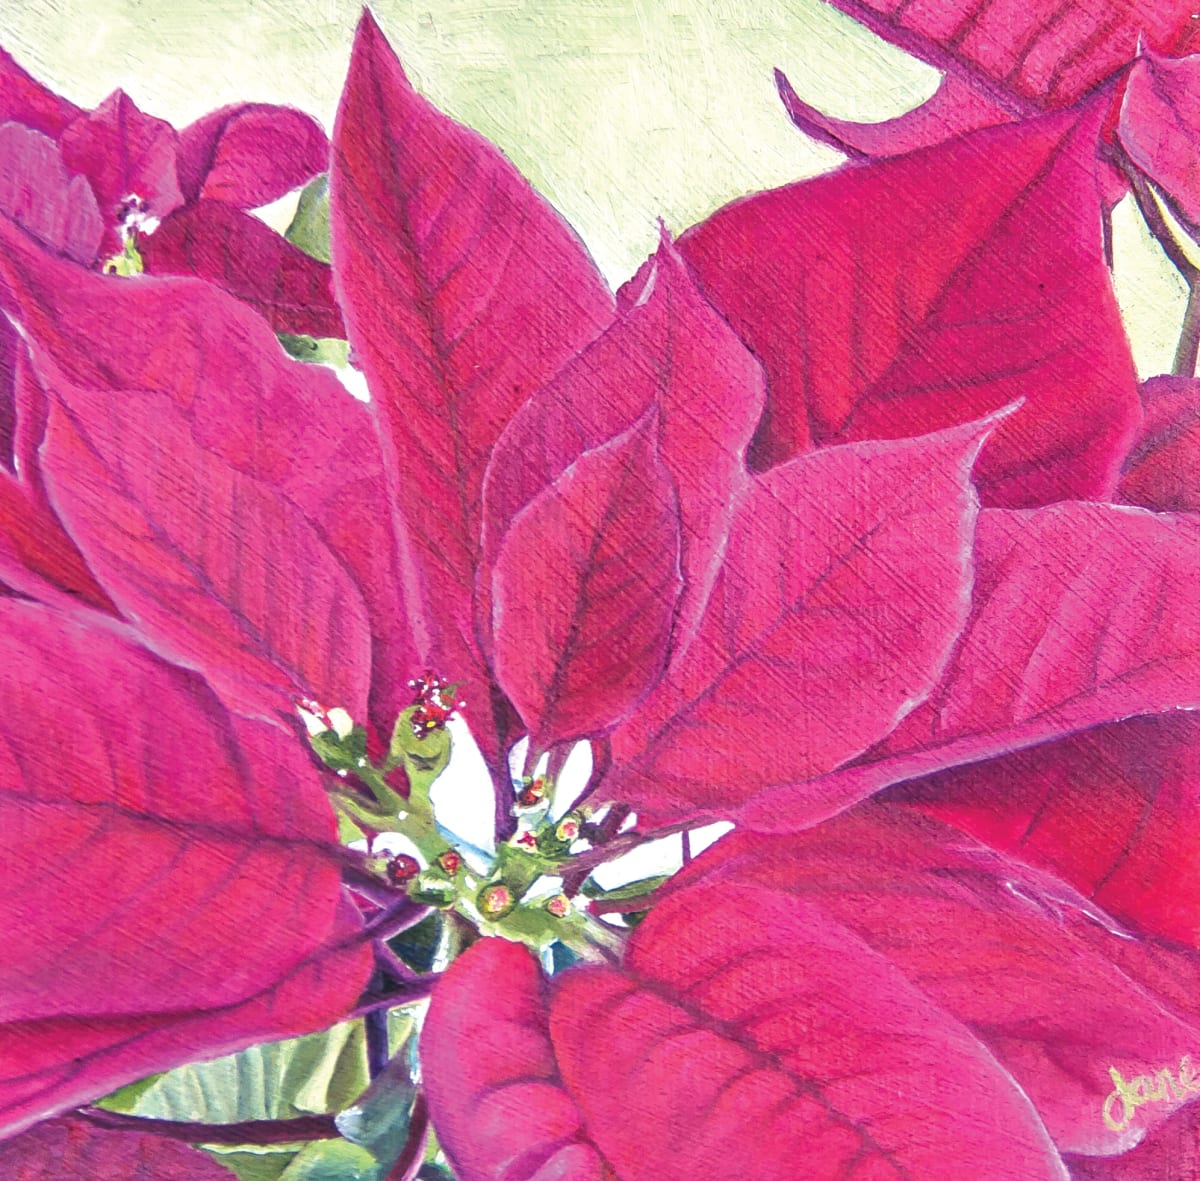 Everlasting Joy by Nila Jane Autry  Image: Star of Bethlehem, Merry Christmas! I've always loved Poinsettia's, at least since the Christmas season my adopted sister and her handsome husband and cute kiddos came Christmas Caroling to my home and brought me my first living Poinsettia. Never noticed them before. My Love Language is Gifts. Just the fact that they spent their hard earned money on a gift for me...and I've loved Poinsettias more and more as the years have gone by. It was time to paint one.  I also love the symbolism. The color Red symbolizes the Blood of Christ which was shed for us, and the star shape of the petals represents the Star that guided the Wise Men to find the baby Jesus.